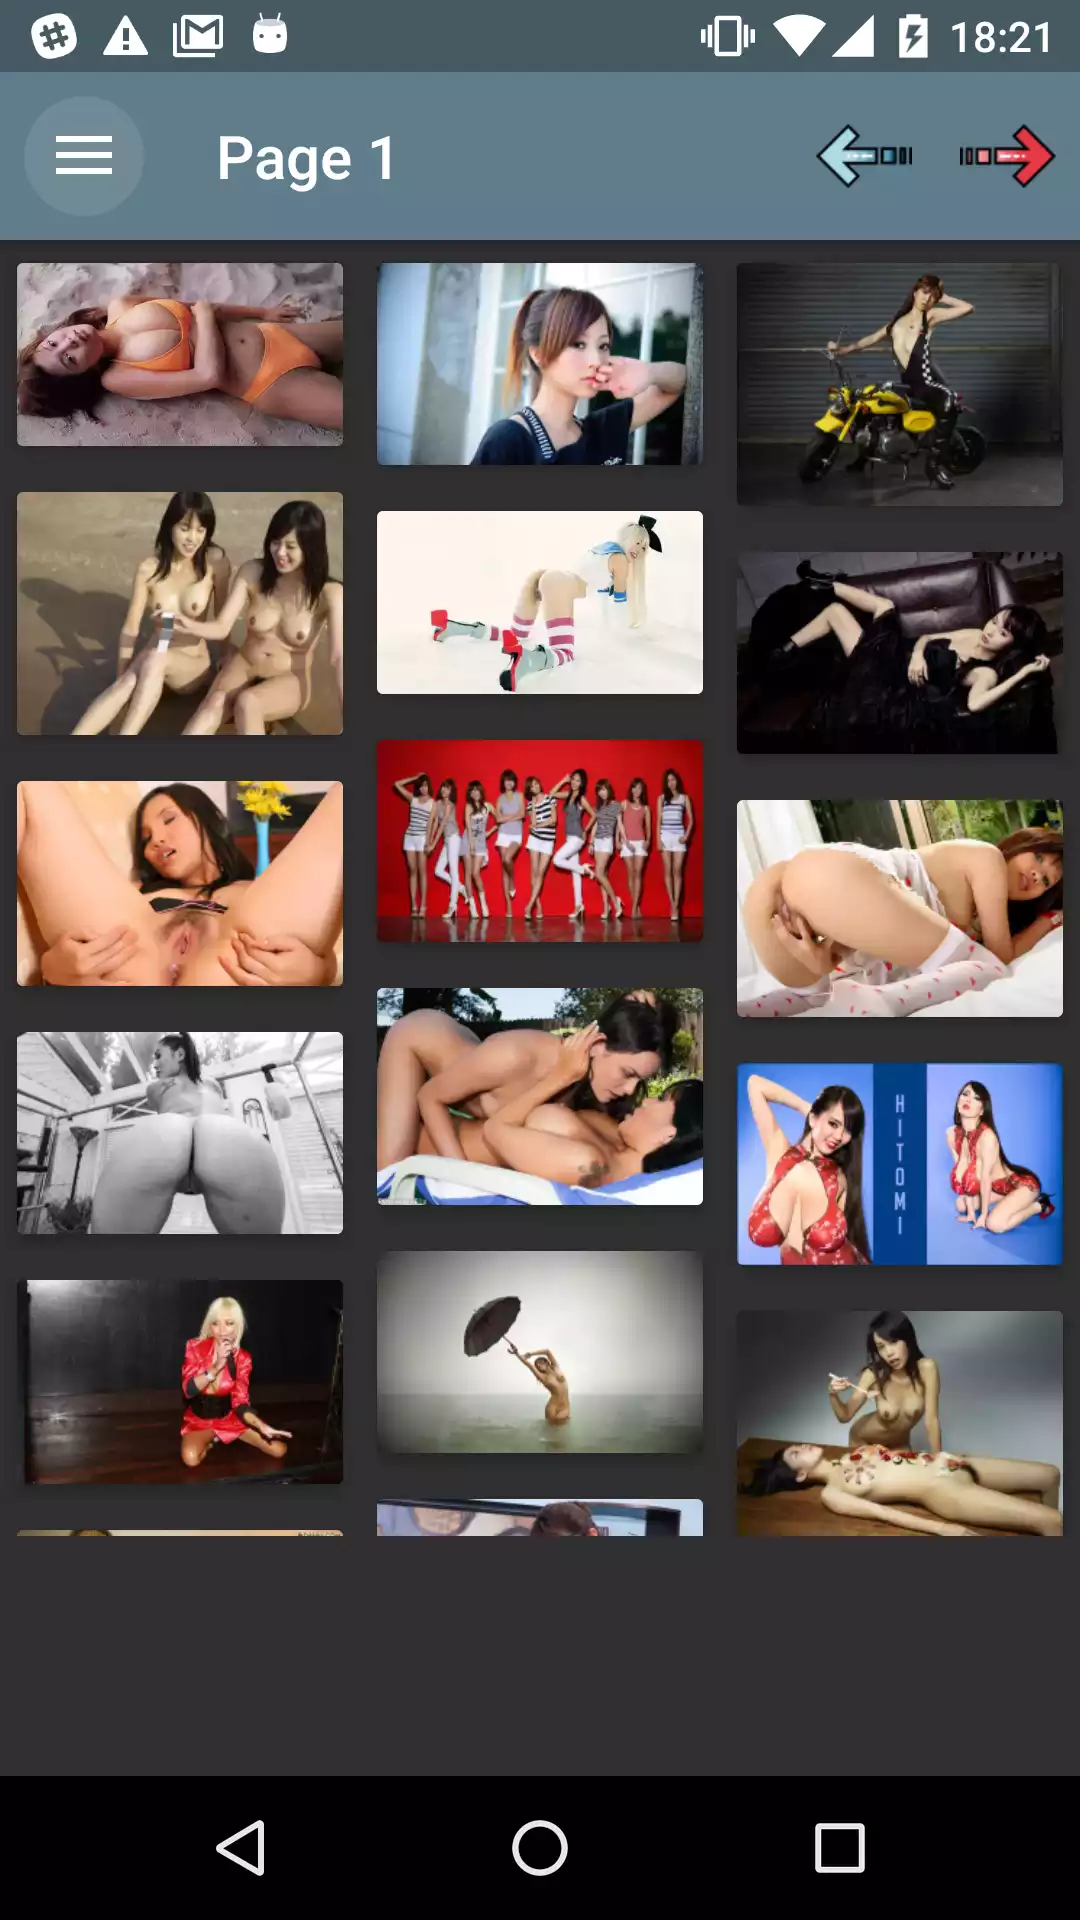 New Asian Wallpapers sissy,porn,hentai,photo,new,images,gallery,wallpaper,backgrounds,android,good,pic,star,photos,apps,sexy,hentia,hotmilfpics,pornstar,comic,download,wallpapers